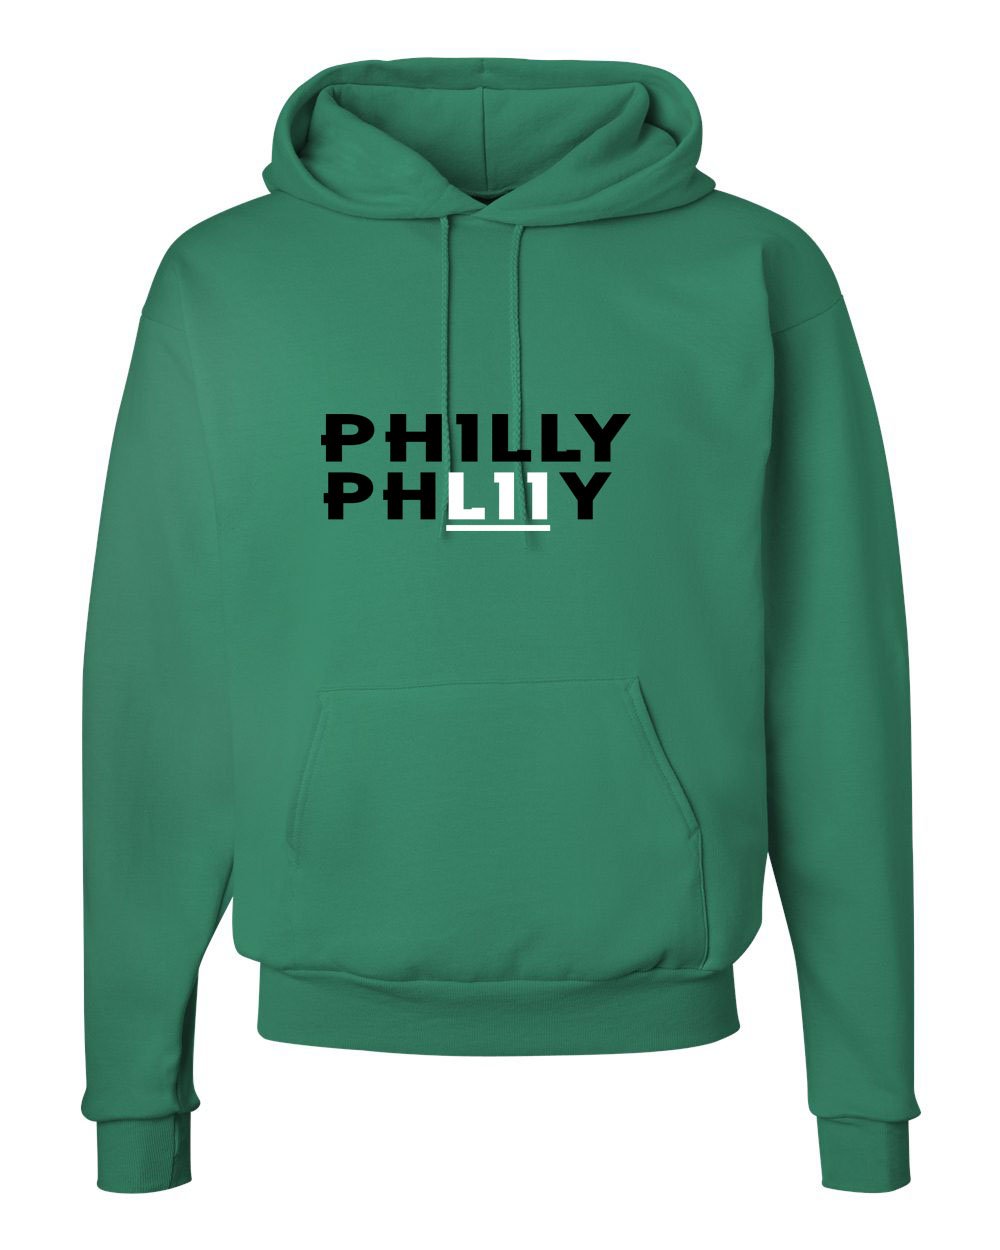 Philly Philly Hoodie